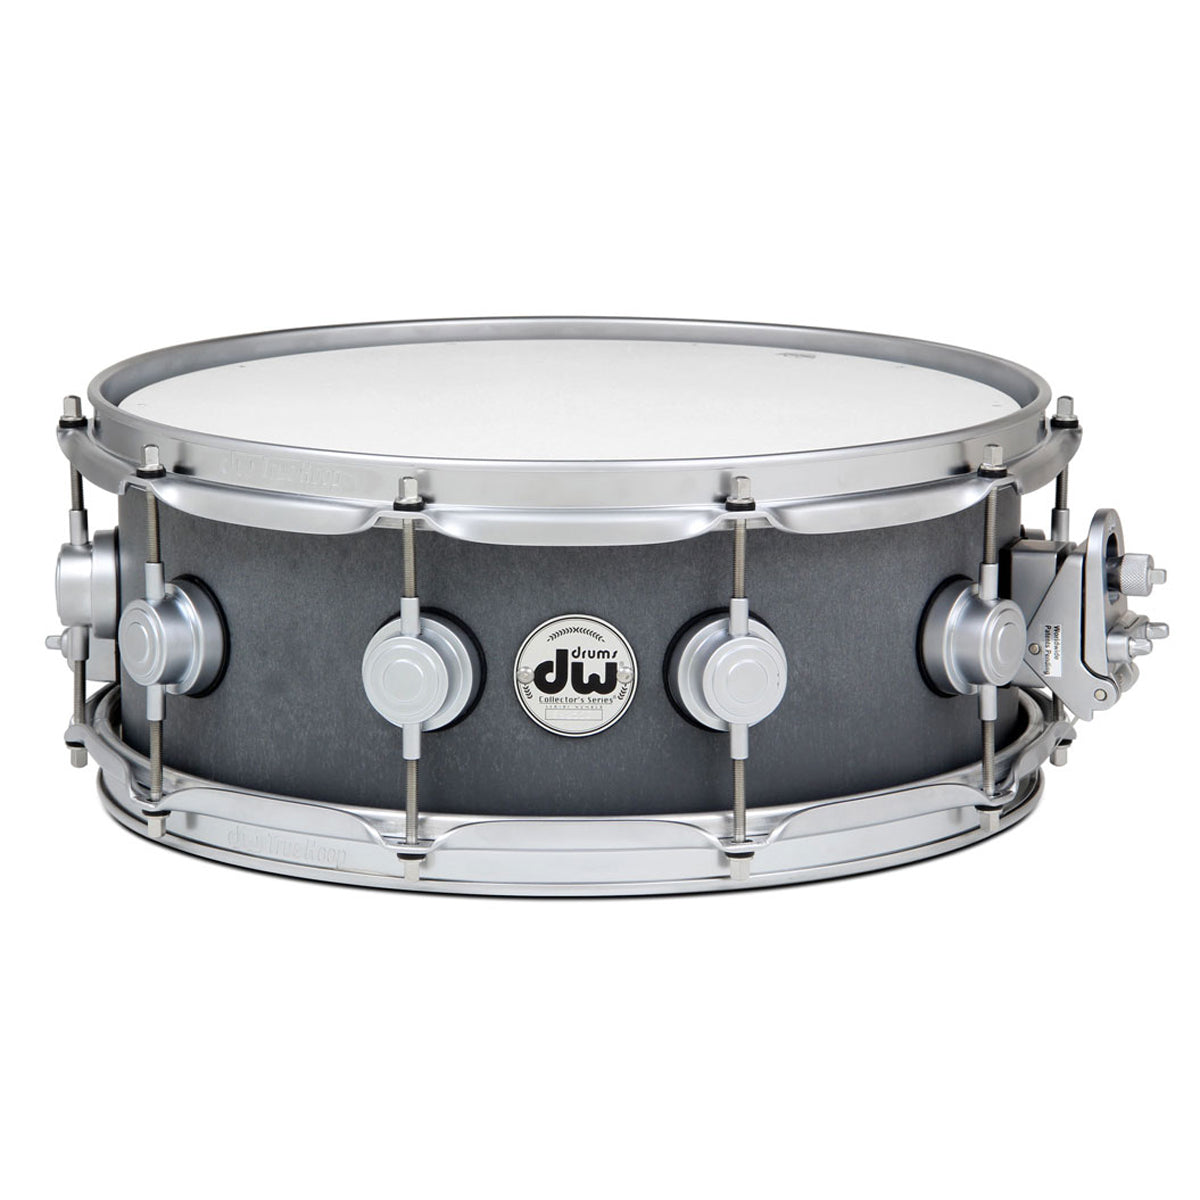 DW Collector's Series 14"x5.5" Concrete Snare